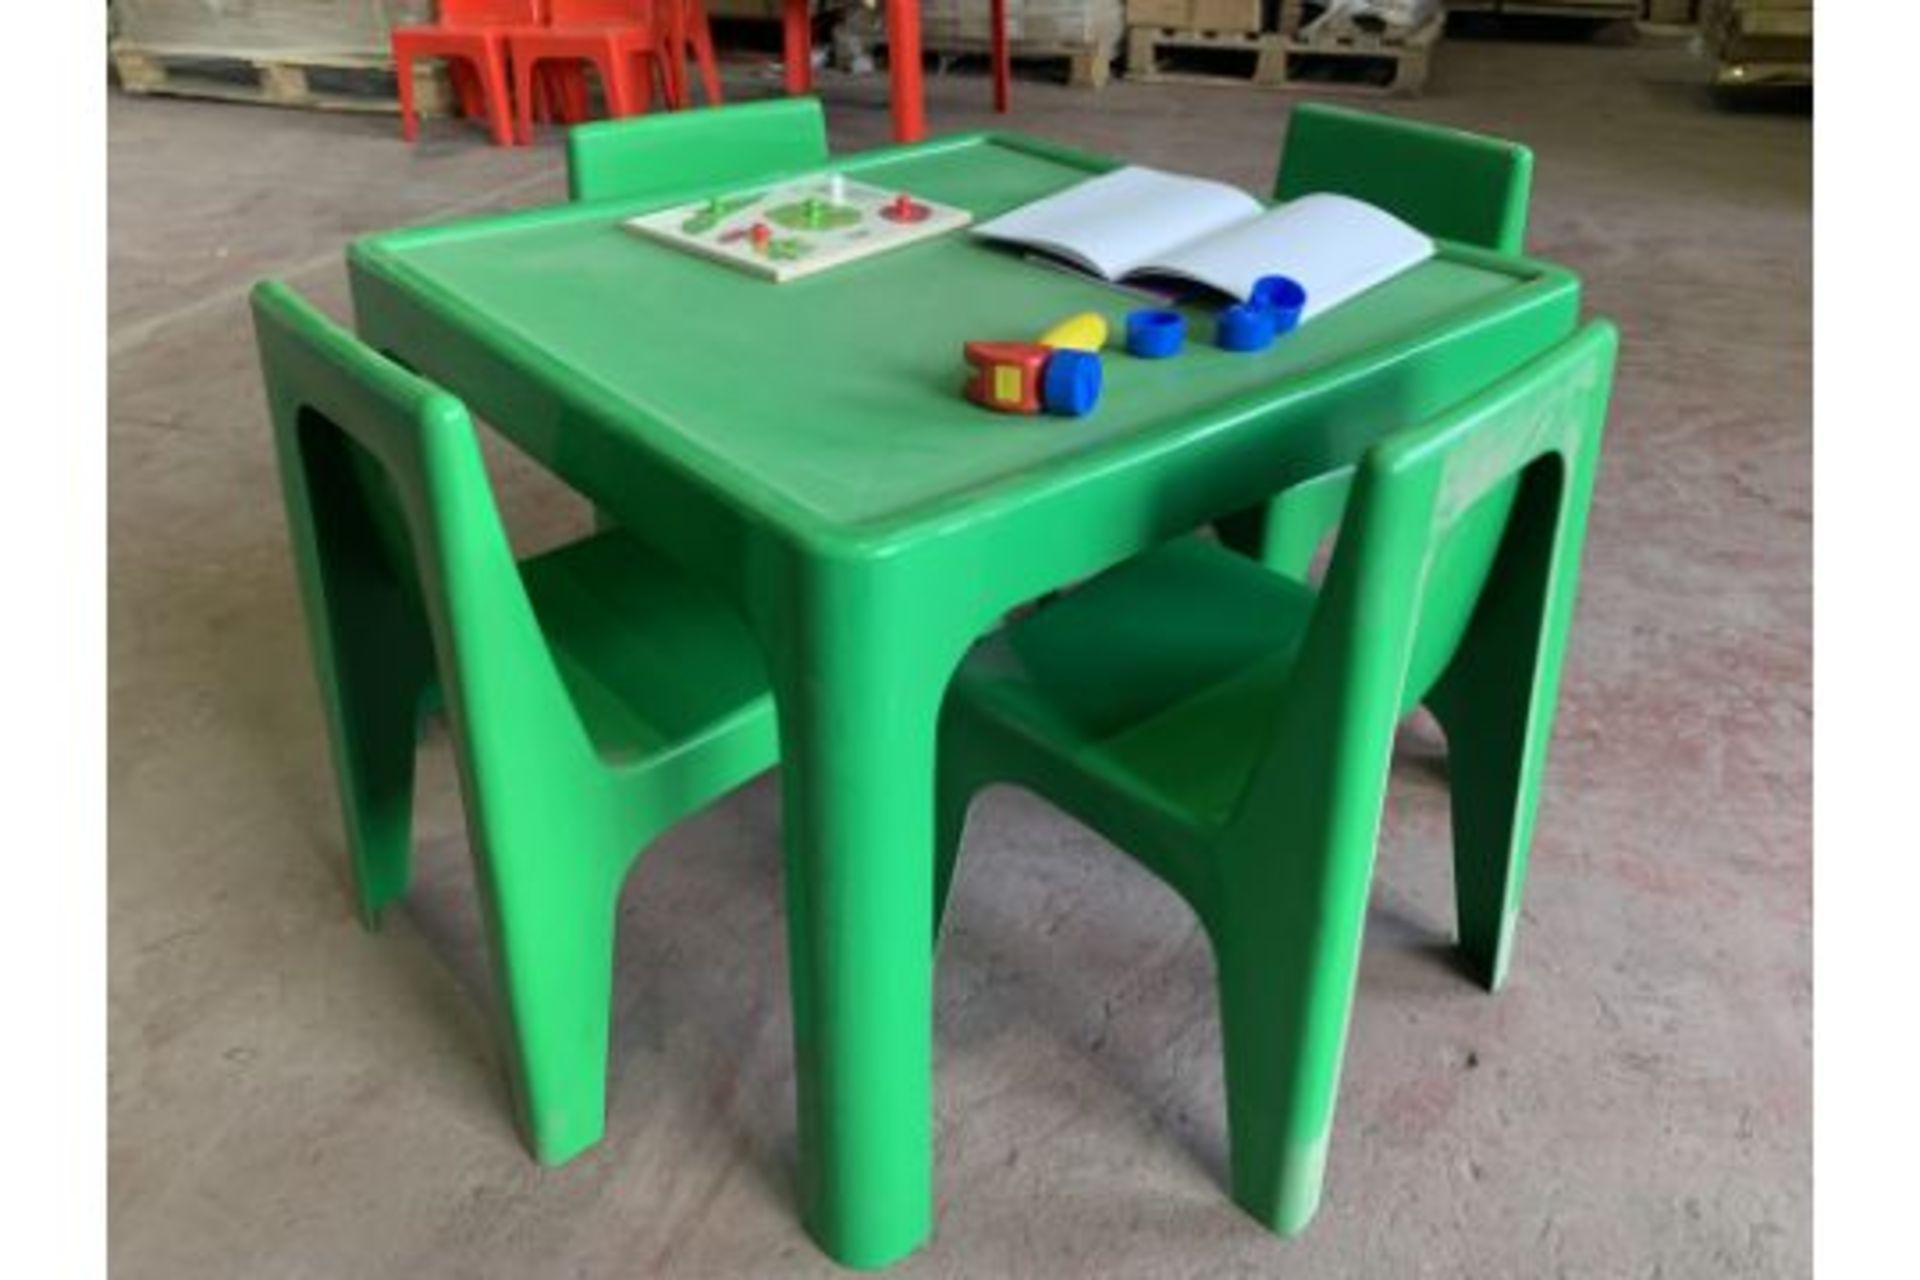 3 X BRAND NEW CHILDRENS OUTDOOR TABLE AND CHAIR SETS GREEN - EACH SET INCLUDES 1 X TABLE & 4 X